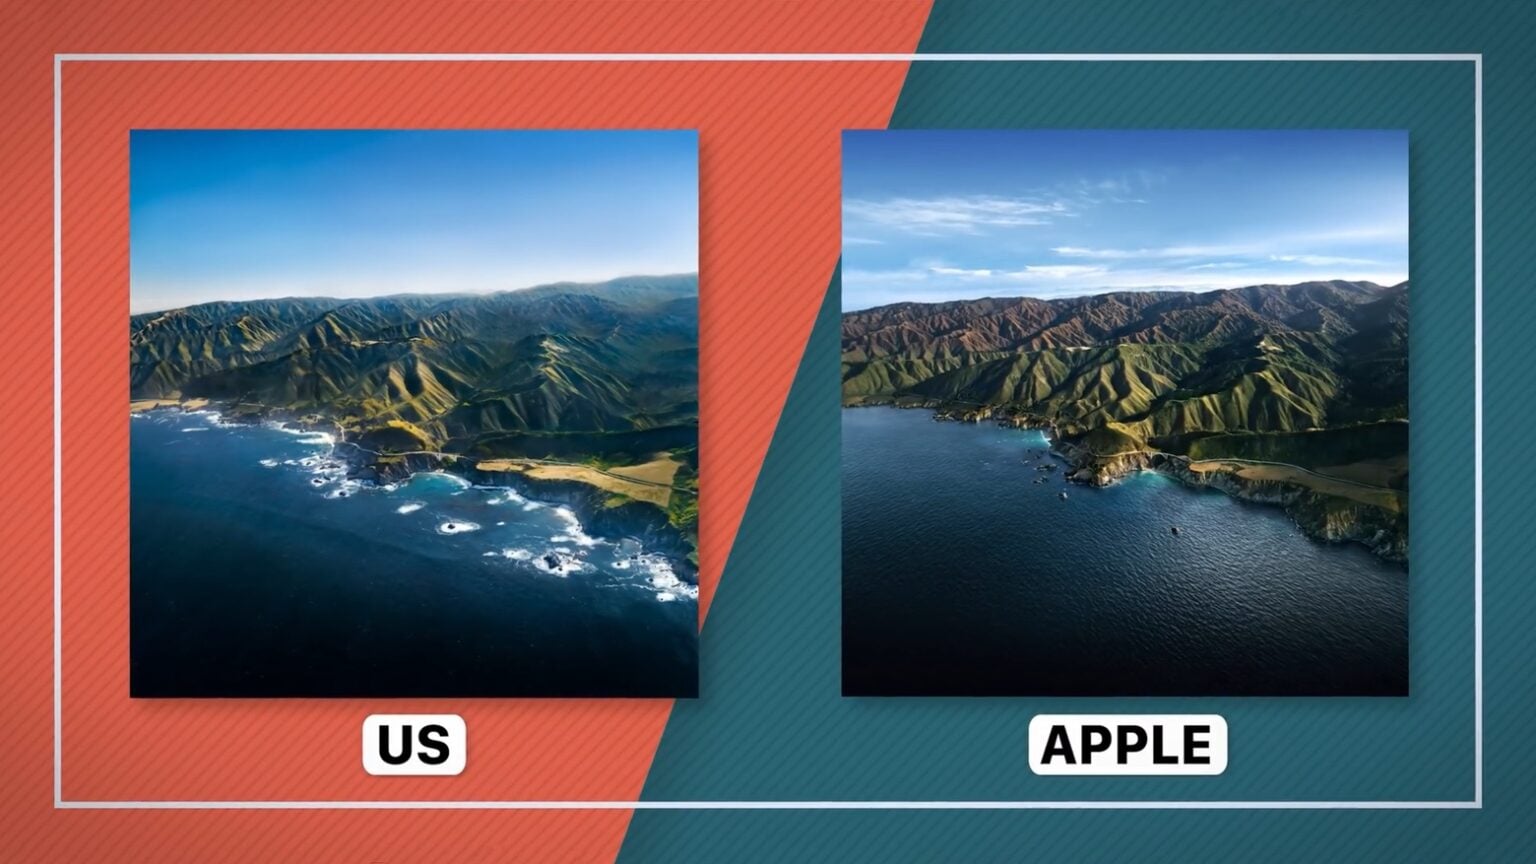 It took a helicopter and some luck to re-create the macOS Big Sur wallpaper.